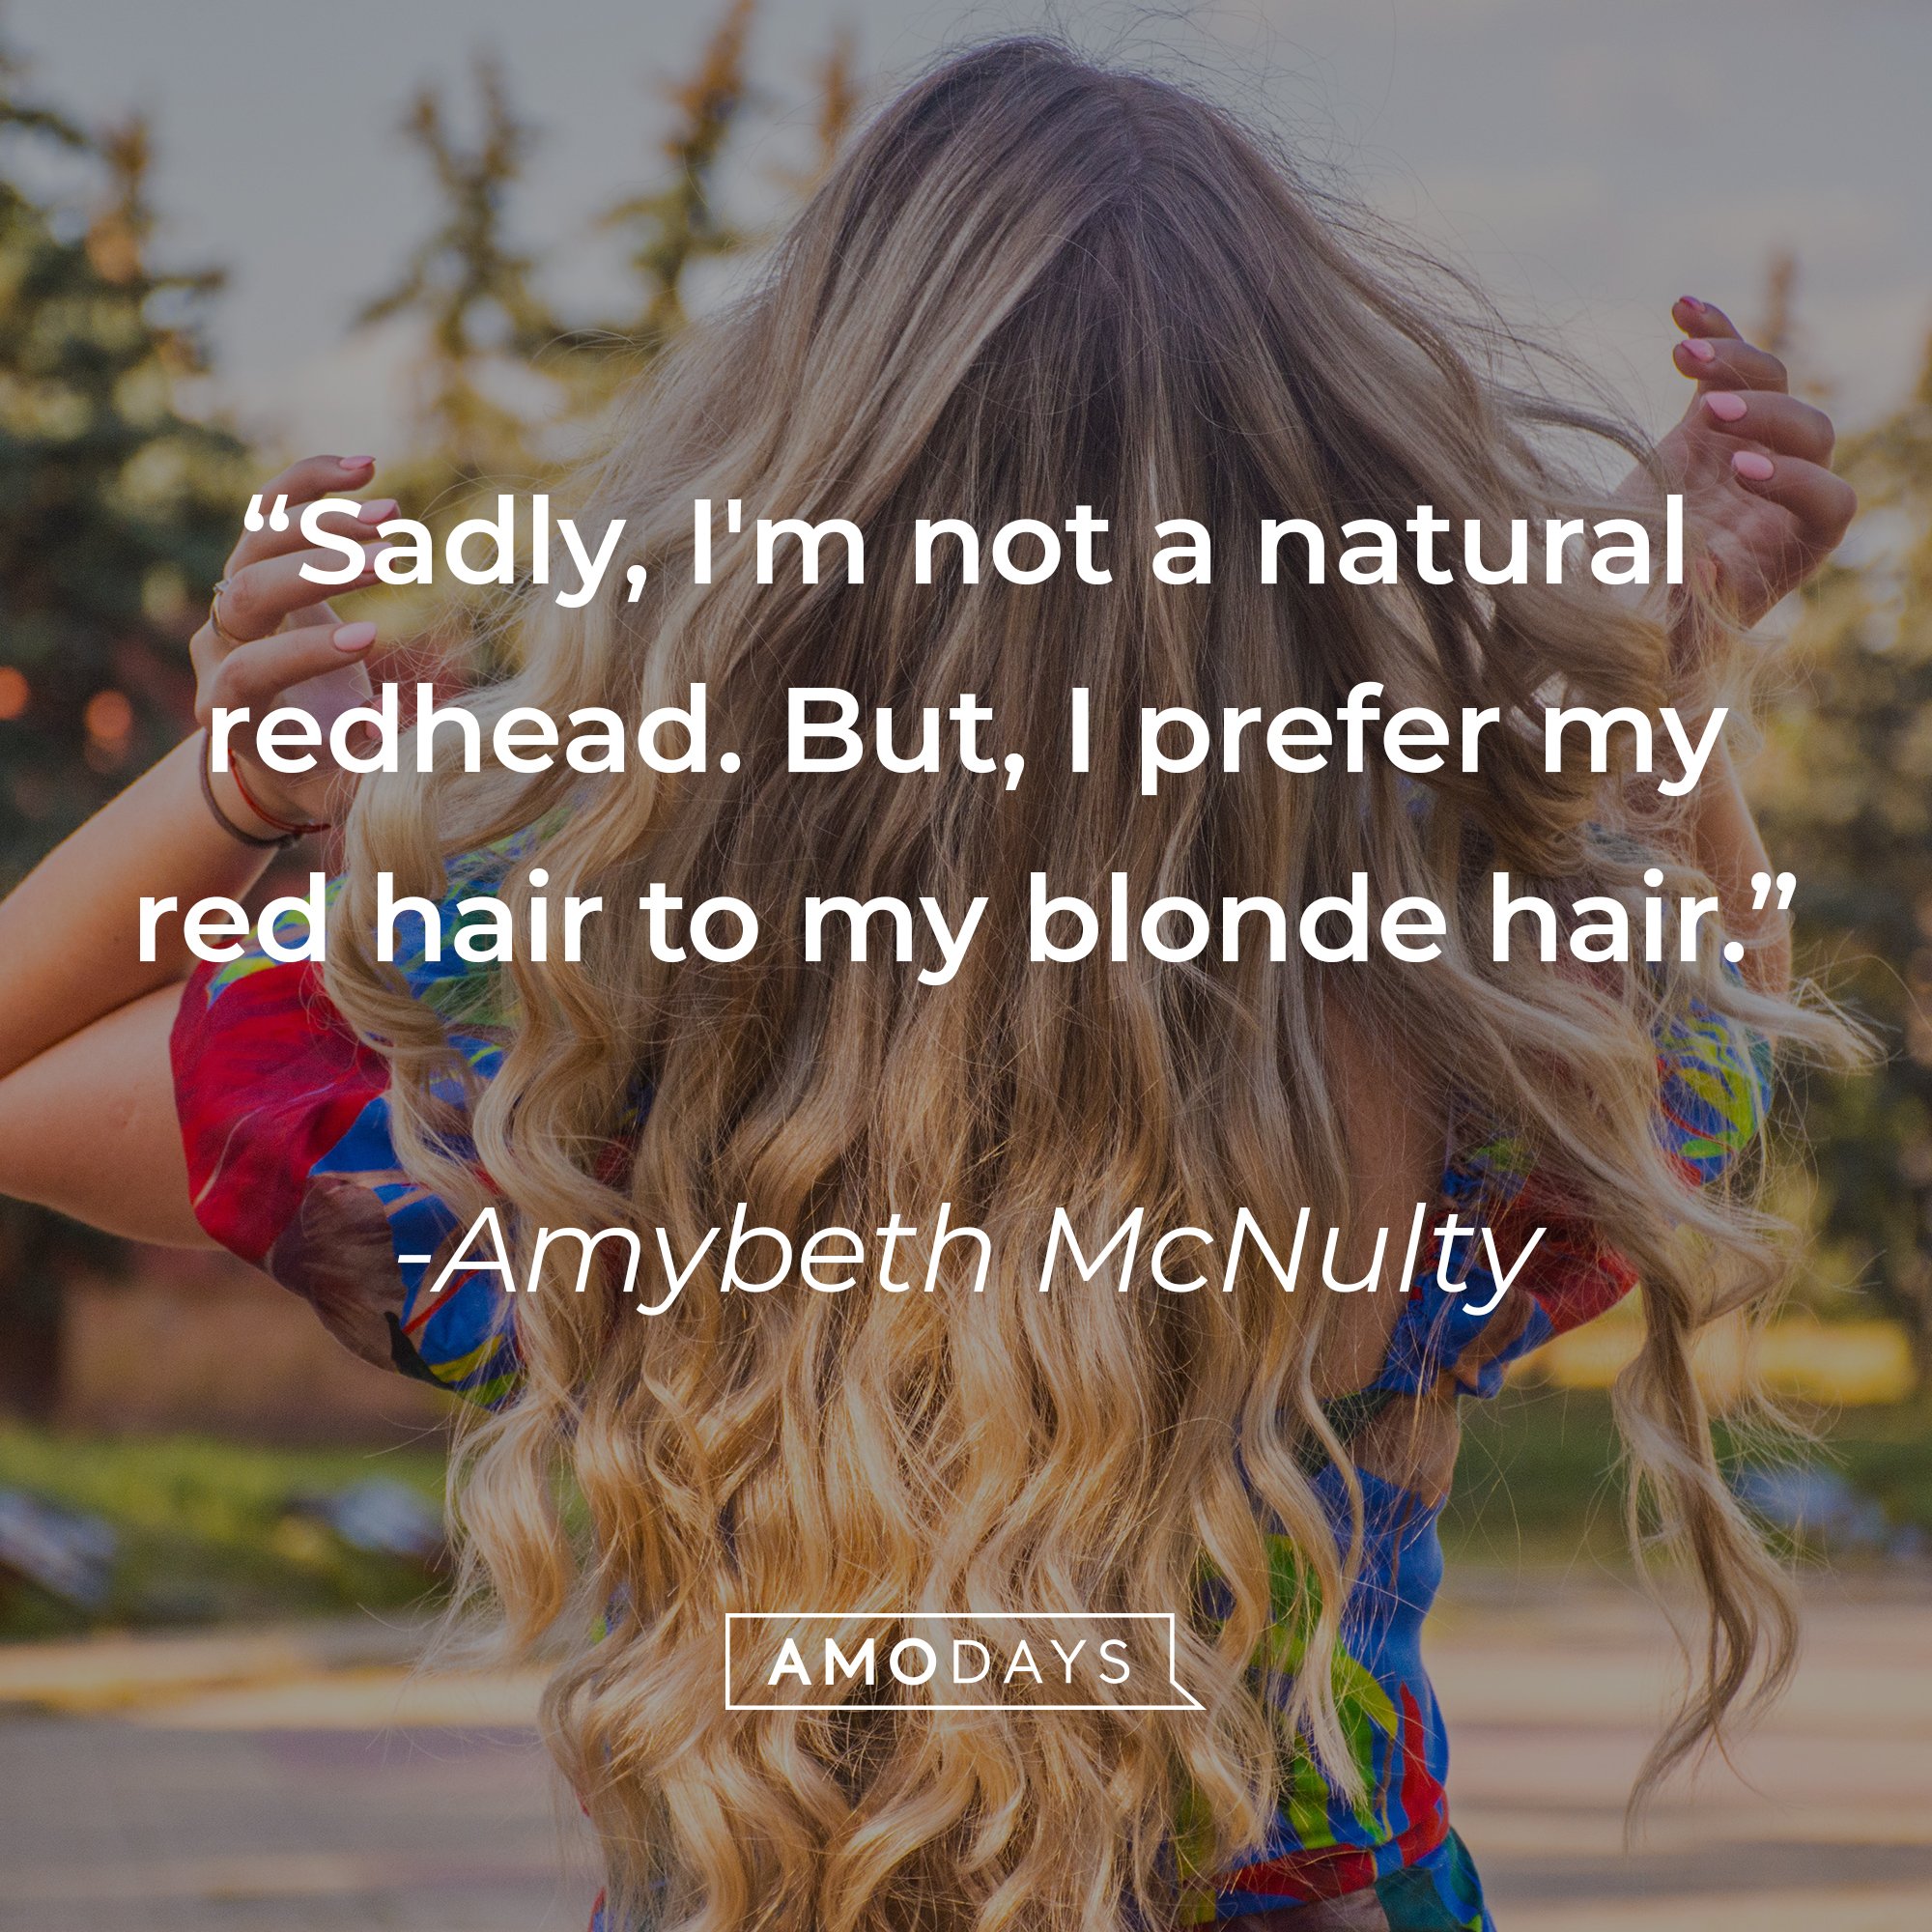 Amybeth McNulty’s quote: "Sadly, I'm not a natural redhead. But I prefer my red hair to my blonde hair." | Image: AmoDays